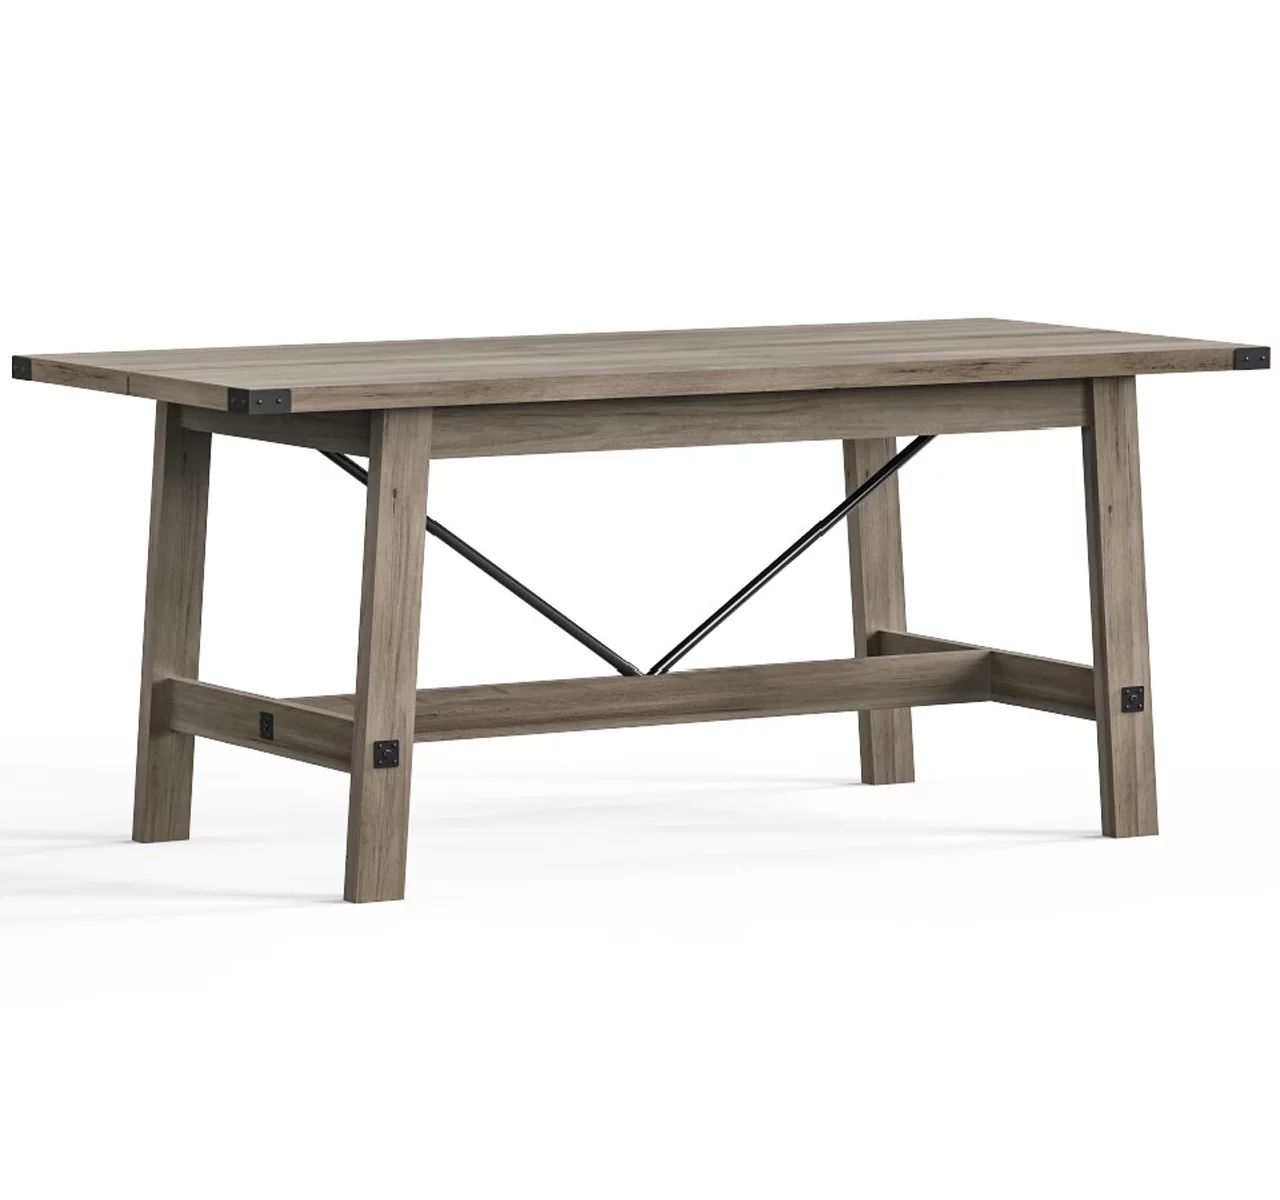 67.7" Rustic Grey Dining Table for Kitchen Room, 6 Person Modern Wood Table | Walmart (US)